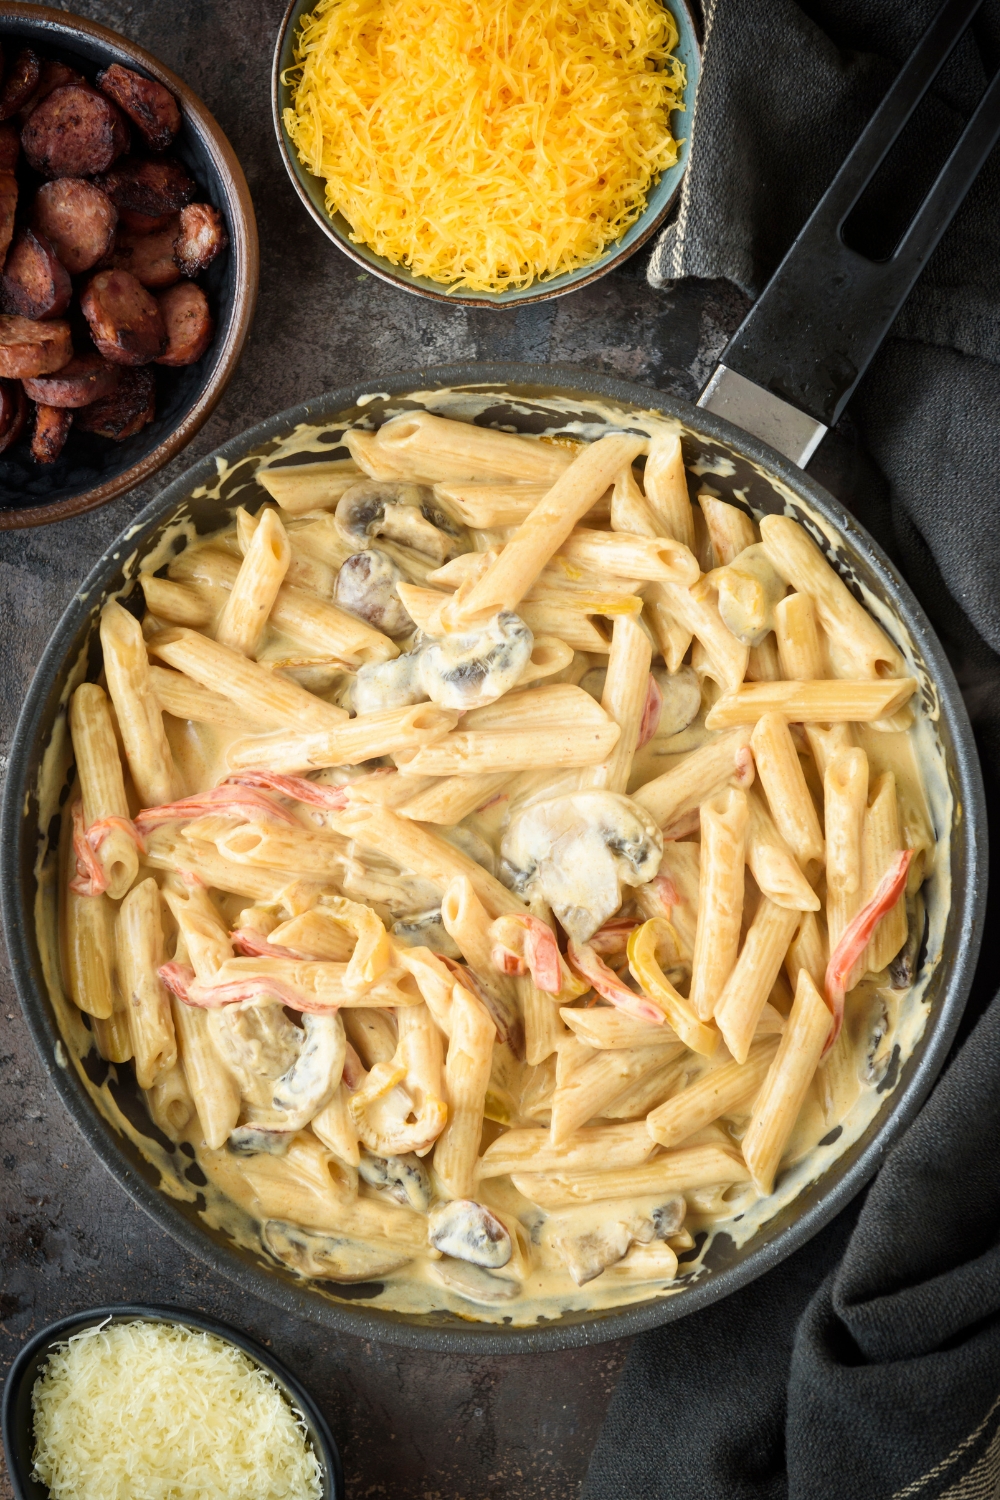 A skillet filled with cooked pasta, mushrooms, and bell peppers in a cream sauce.